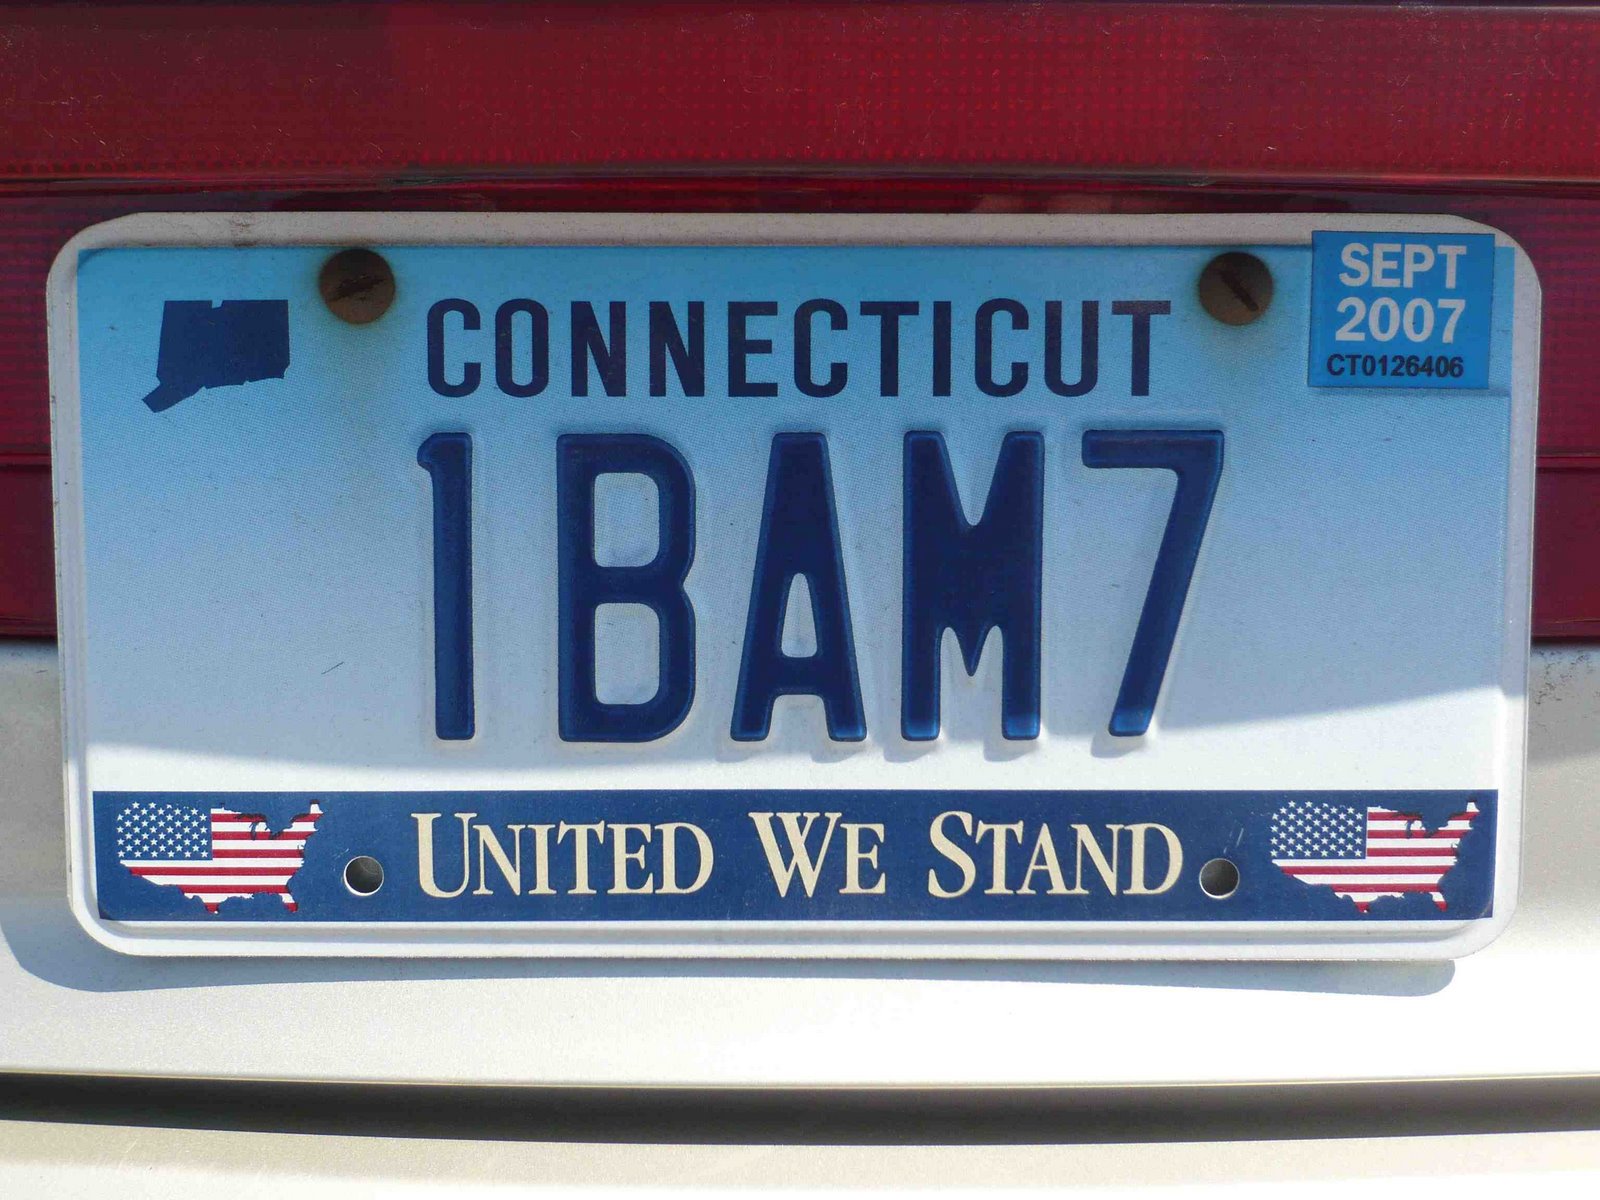 [Connecticut+united+we+stand.jpg]